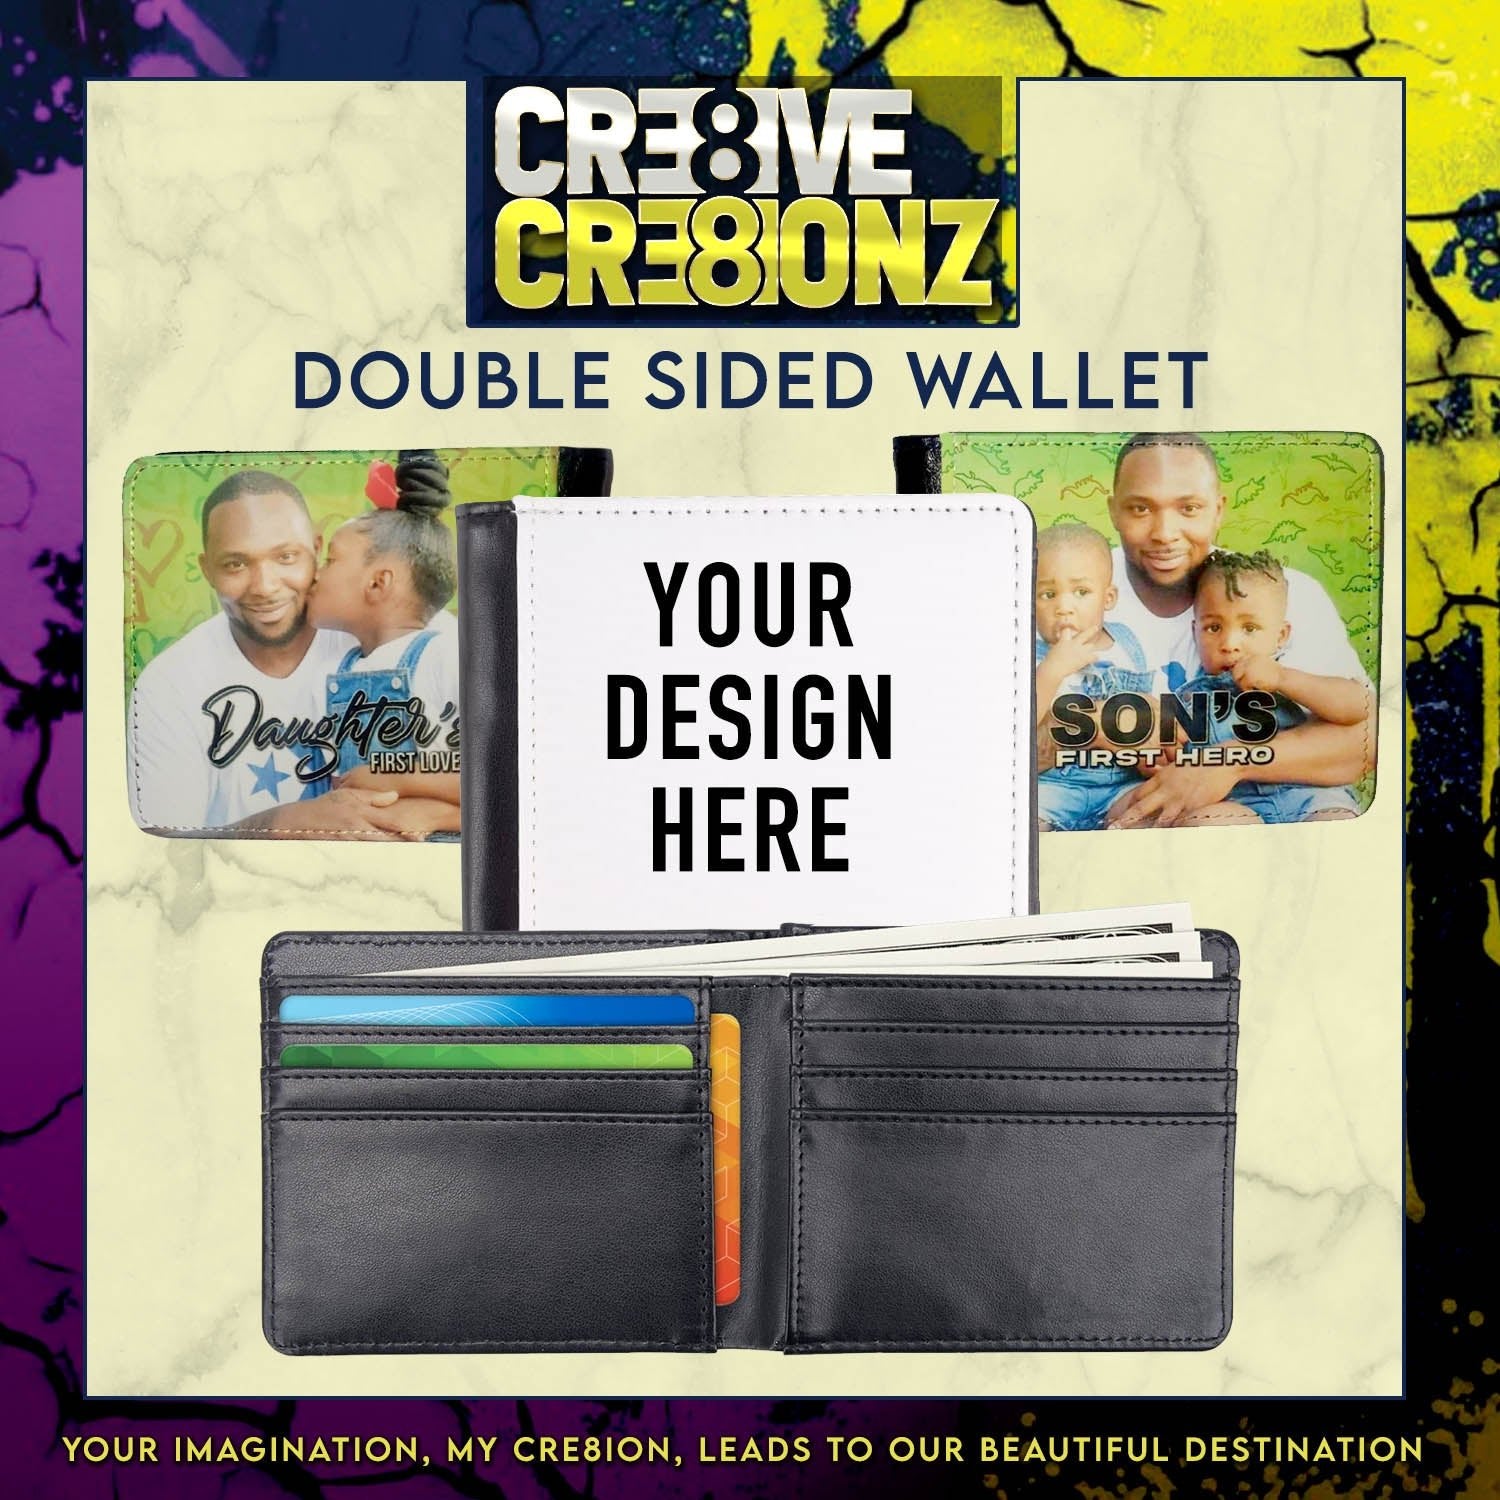 Custom Wallet - Cre8ive Cre8ionz